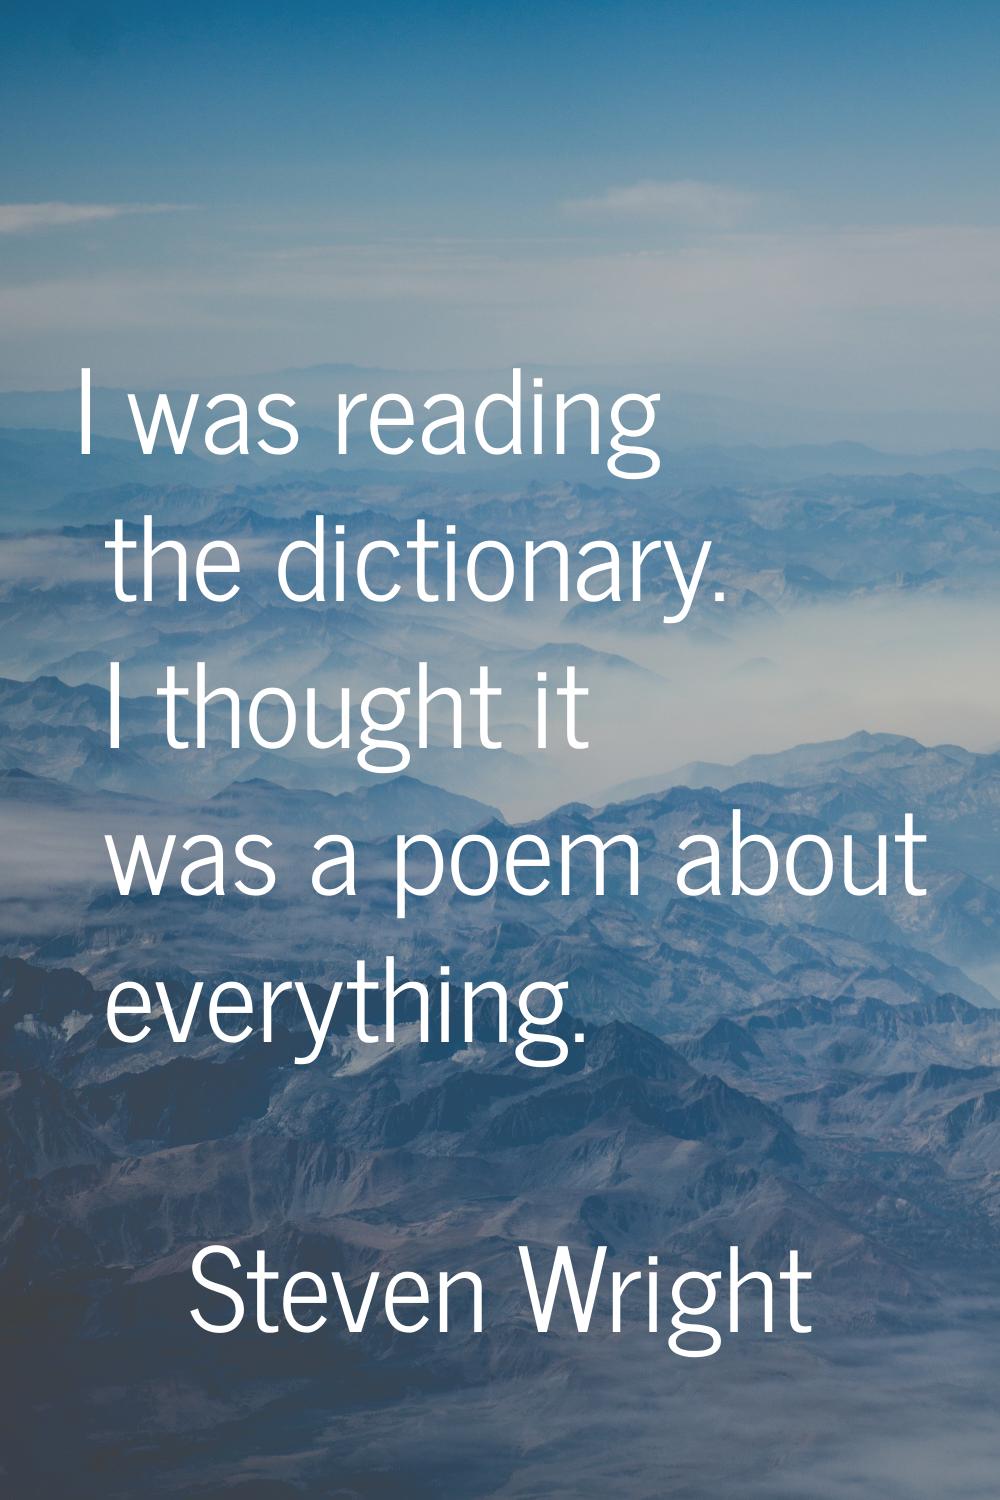 I was reading the dictionary. I thought it was a poem about everything.